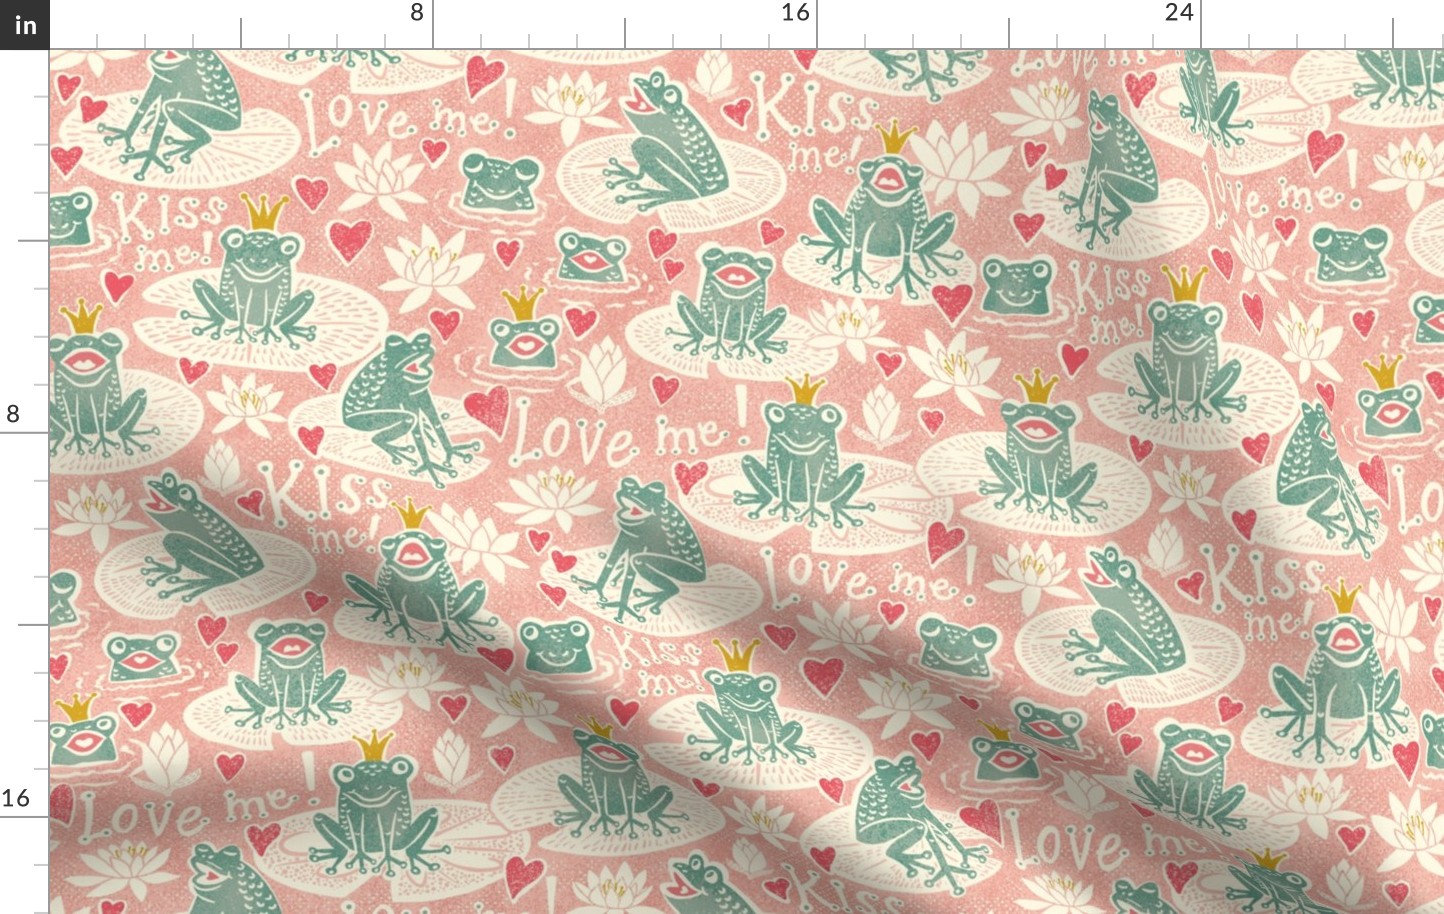 Kiss me prince - frog pond -pink - large scale - 18" fabric- 24" wallpaper